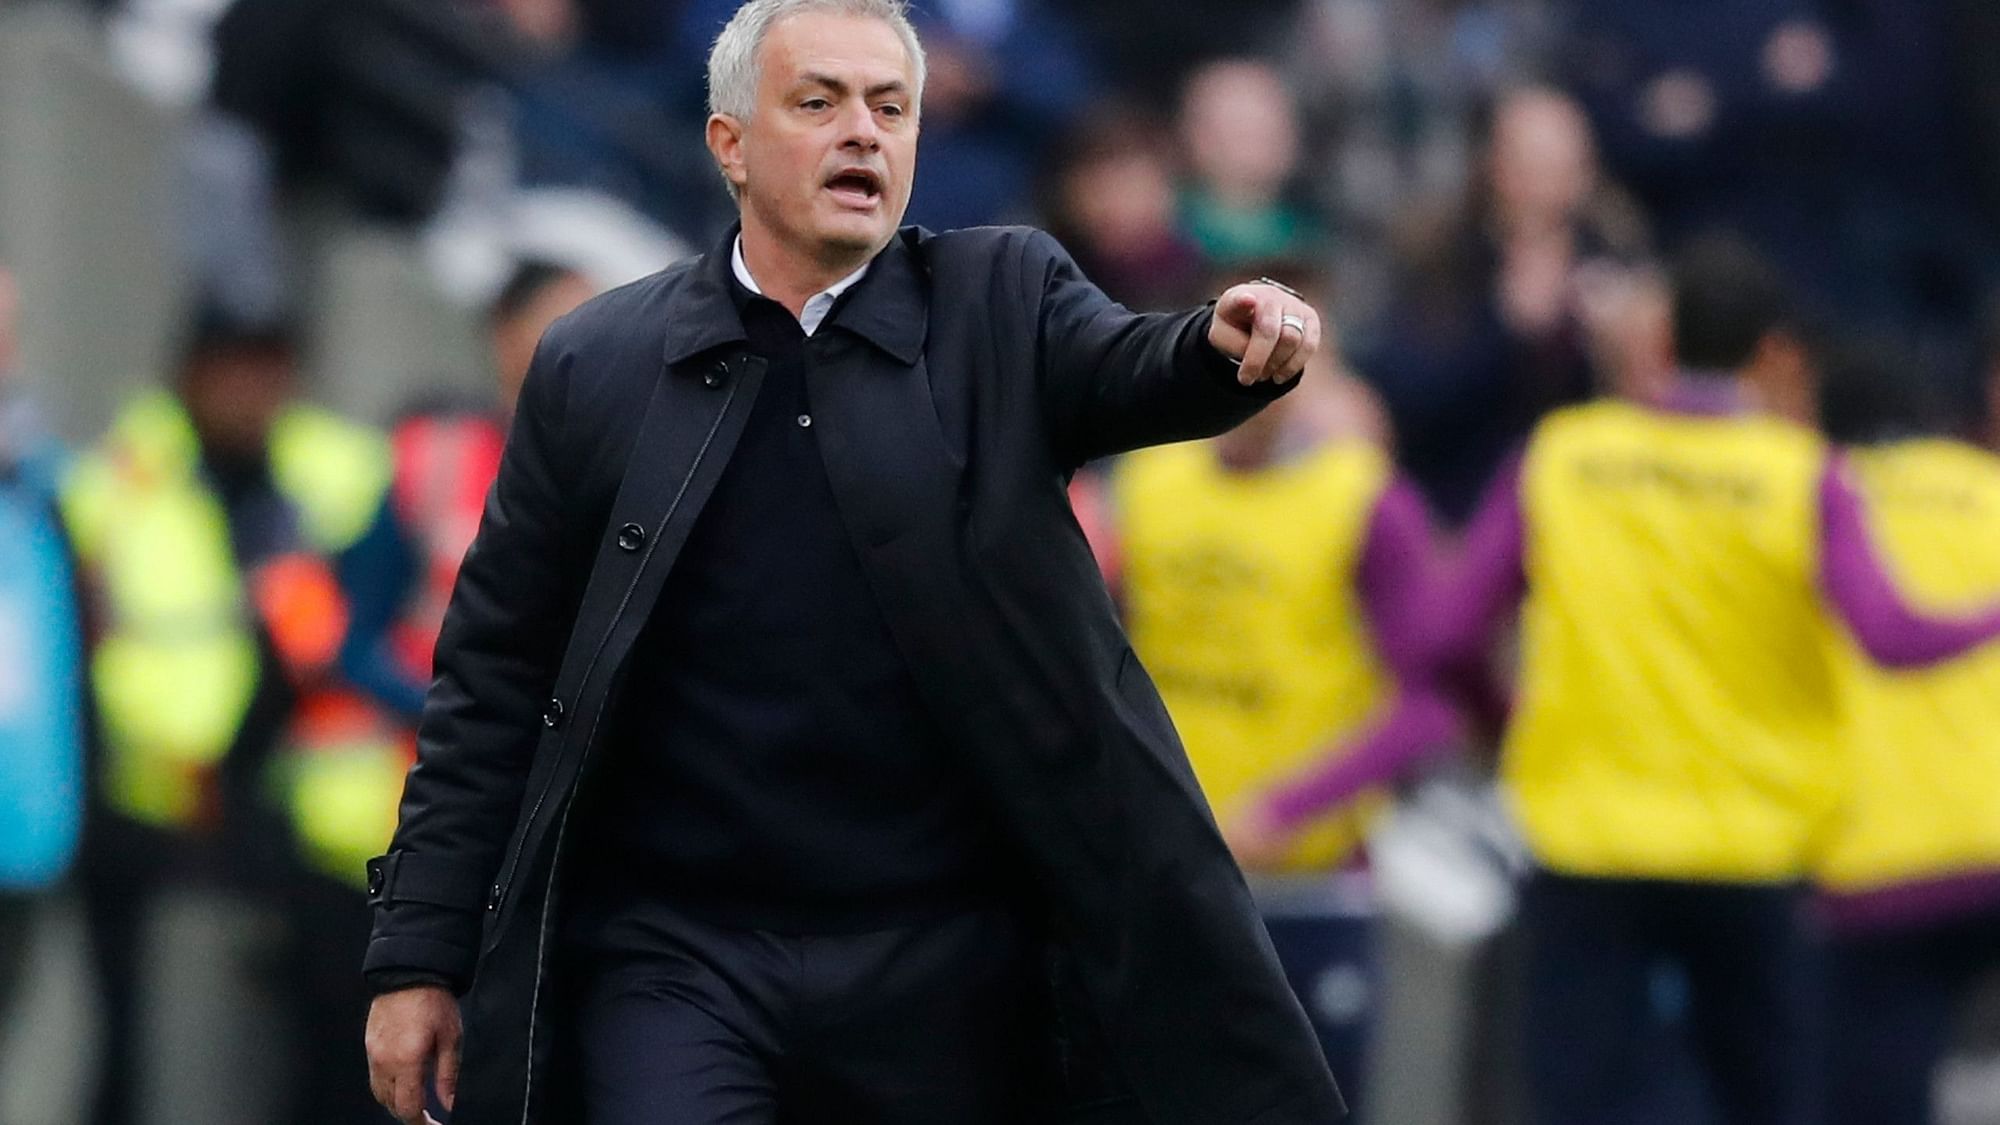 Tottenham’s manager Jose Mourinho calls out to his players during the English Premier League soccer match between West Ham and Tottenham, at London stadium, in London, Saturday, 23 November.